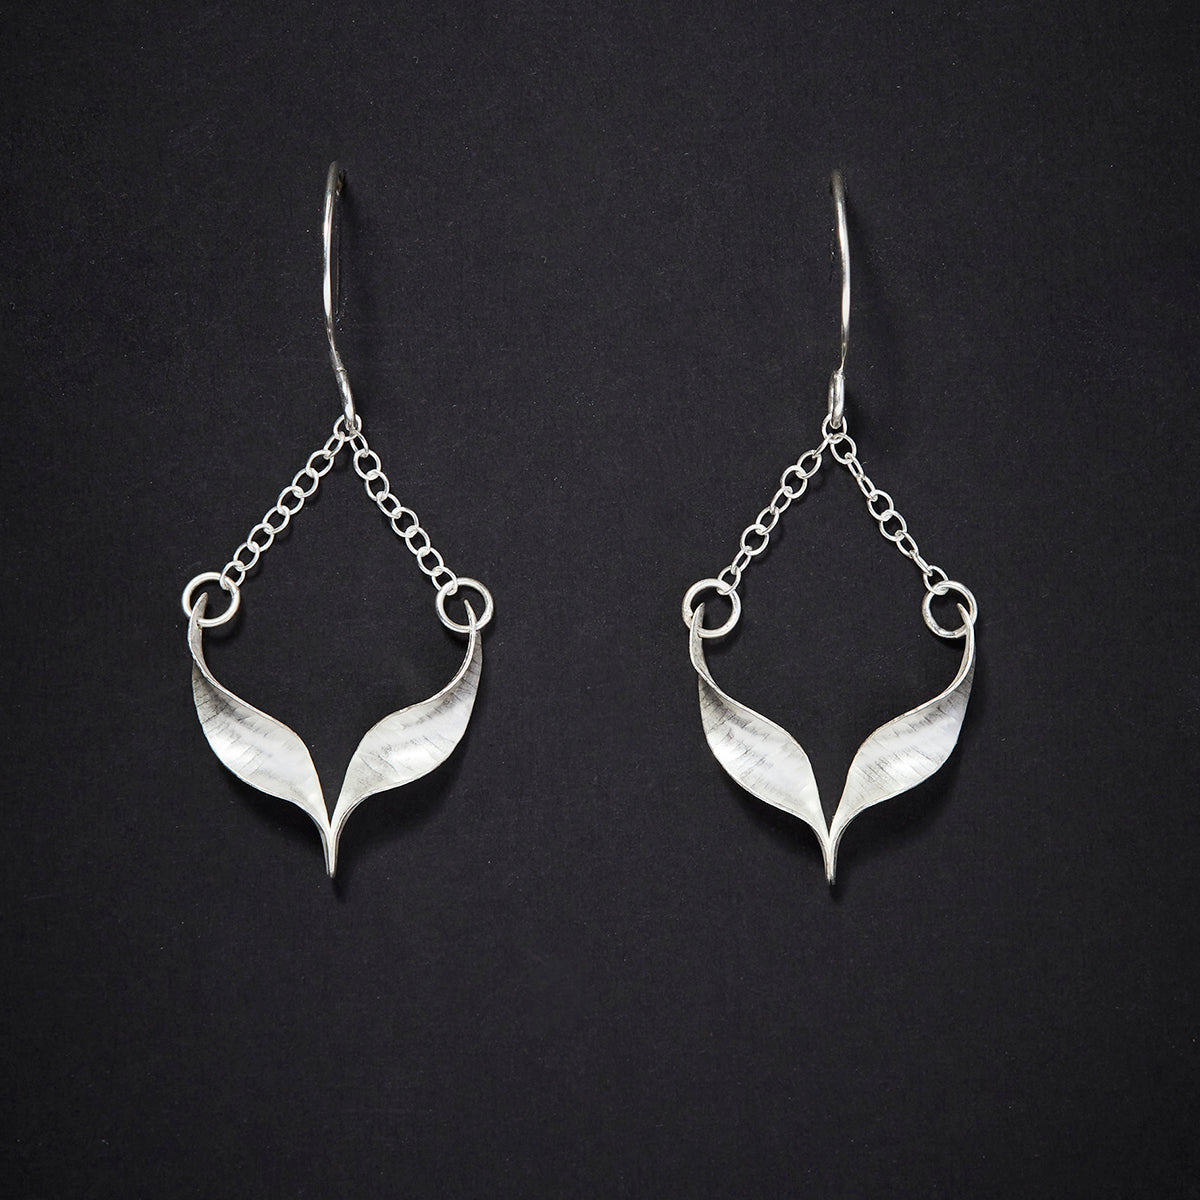 A pair of sculptural silver bird earrings. Each is composed of two twists of hammered silver joined at the central point and hanging from a handmade hook by means of delicate trace chain. They have a hammered texture, non-reflective finish and burnished edges. Shown from the front.